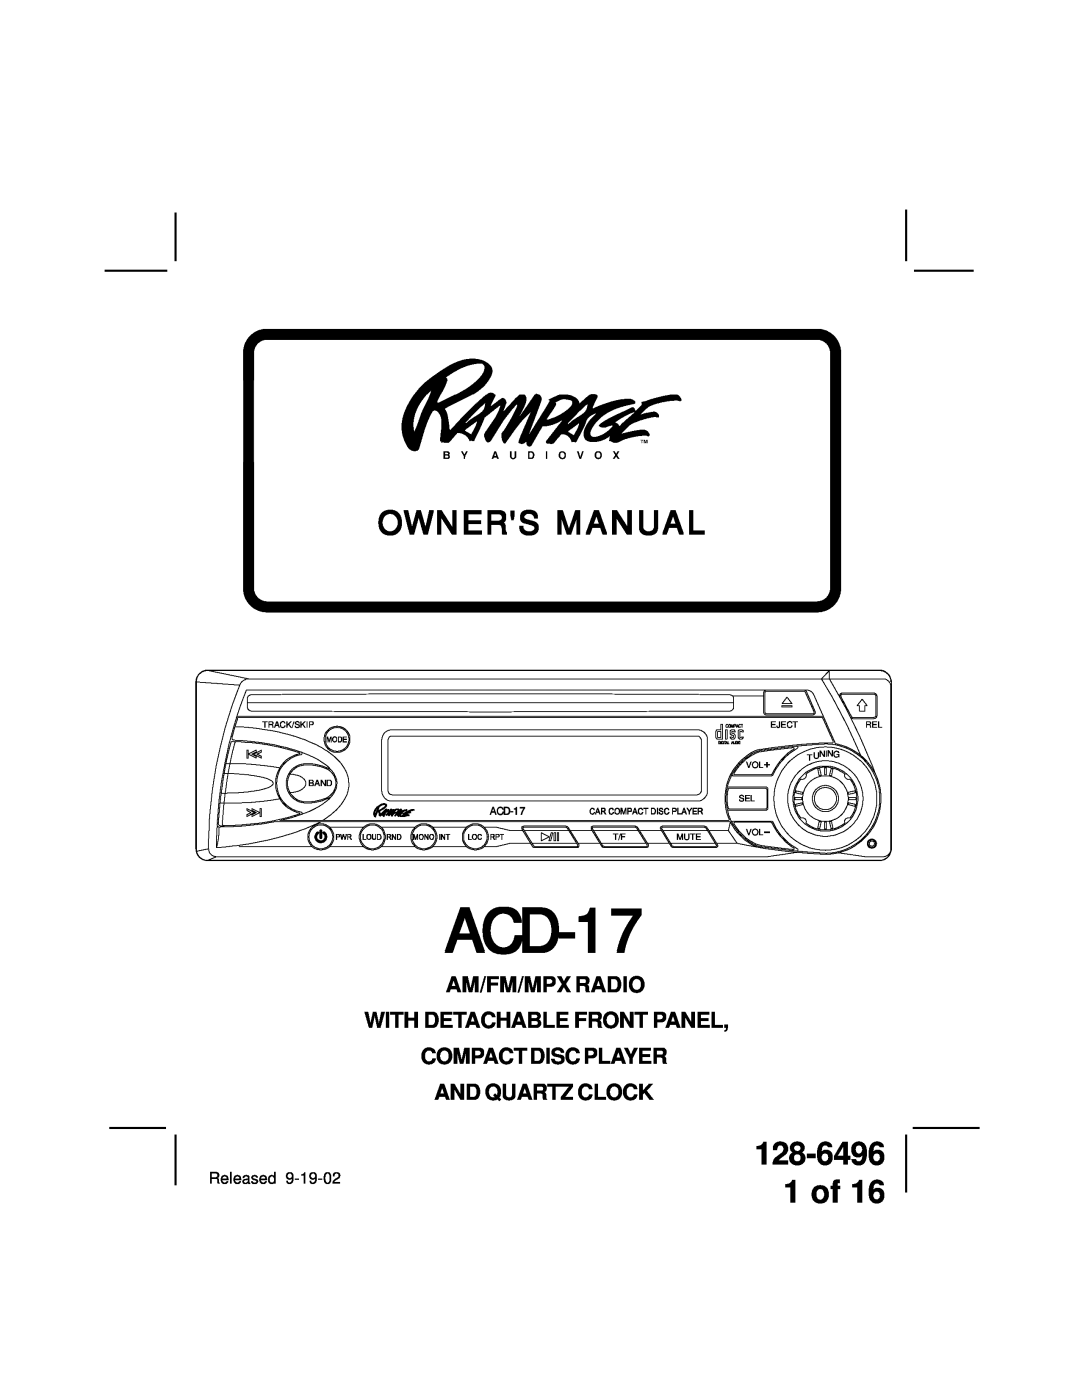 Audiovox ACD-13 manual 128-6496 1 of, ACD-17, Owners Manual, And Quartz Clock, Track/Skip, Eject, Vol Band Sel, Uning T 